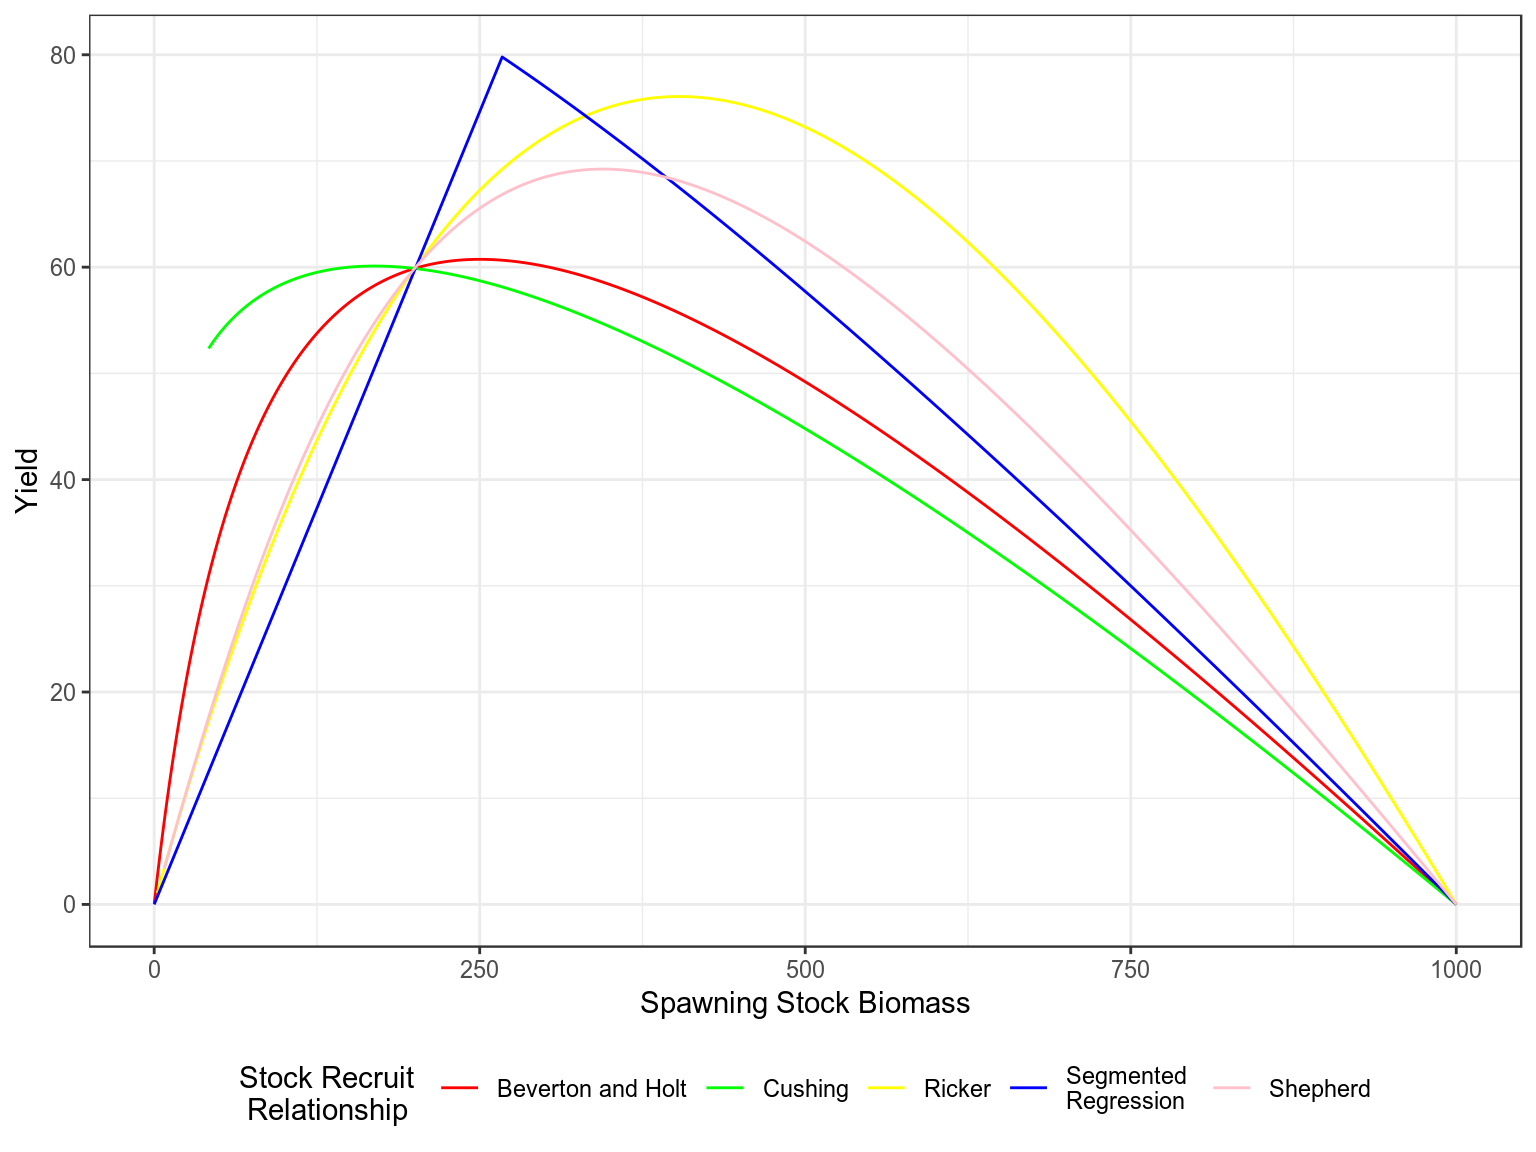 Production curves, Yield v SSB, for a steepness of 0.75 and vigin biomass of 1000.